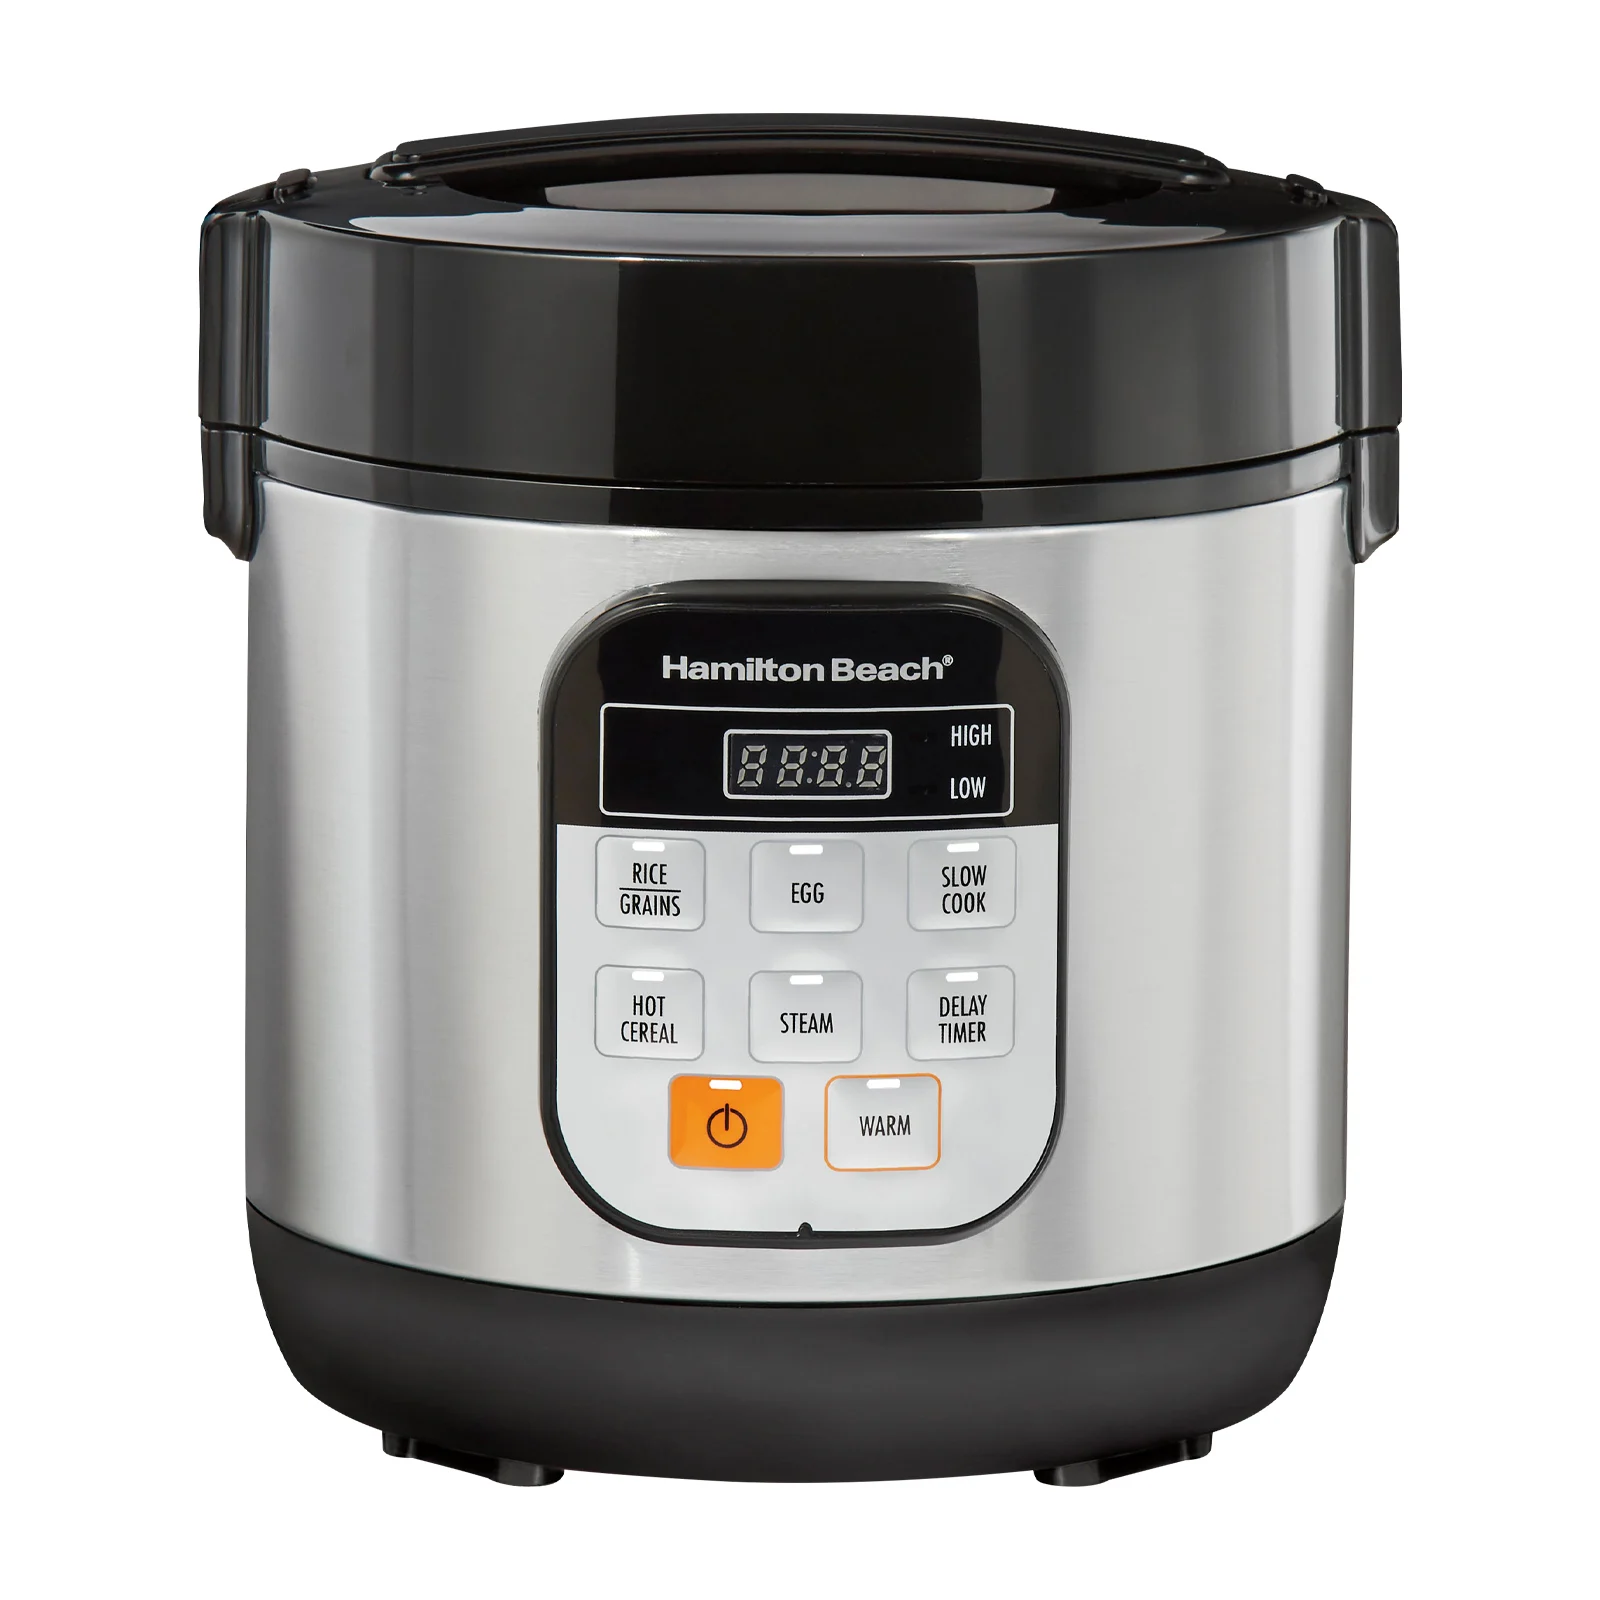 A rice cooker 